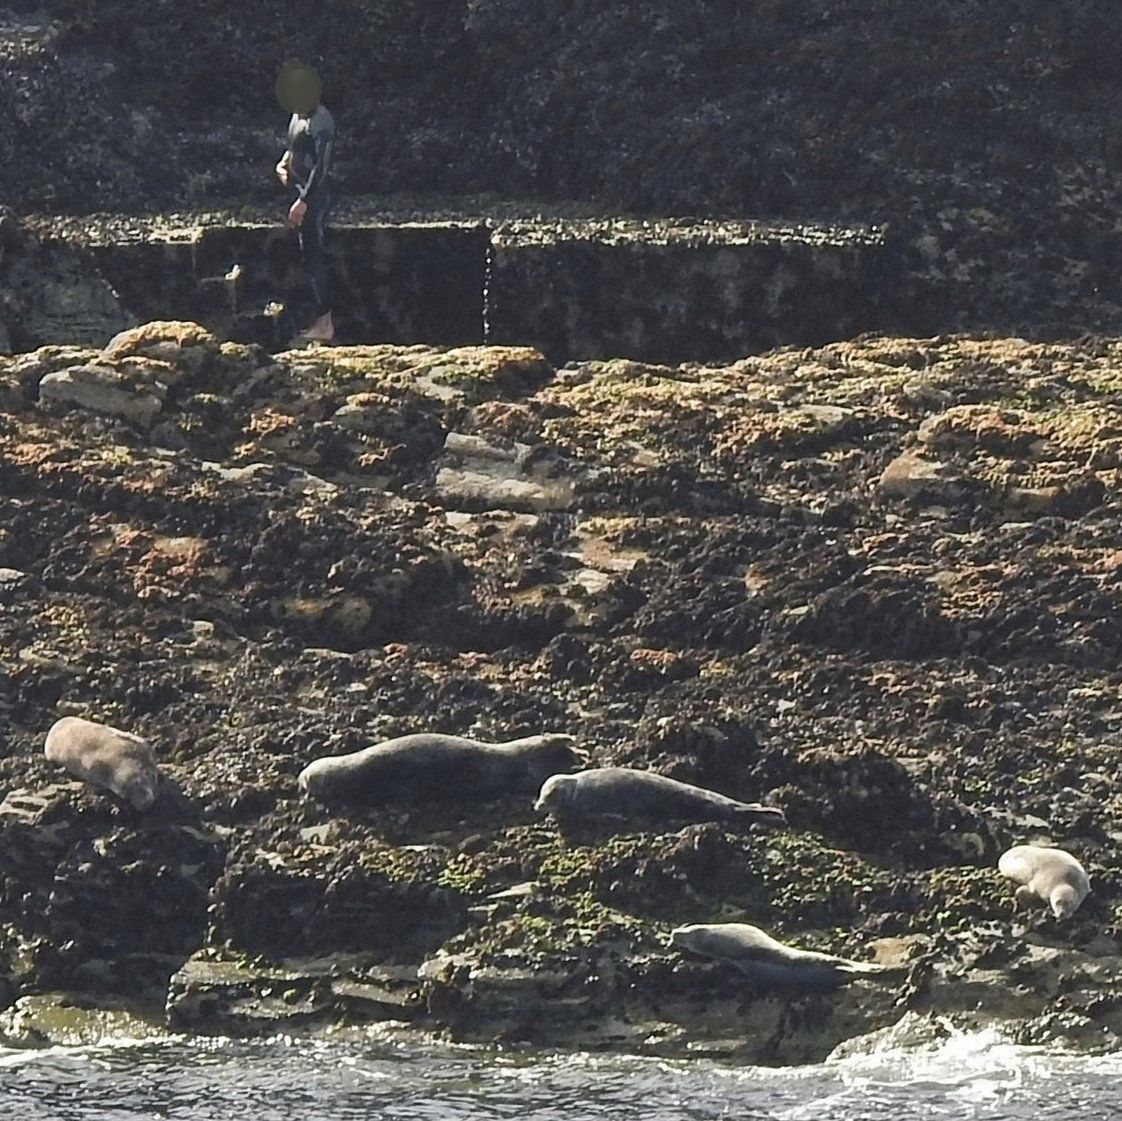 A man in a wetsuit walks on rocks close to seals Picture: Sue Sayer/SWNS